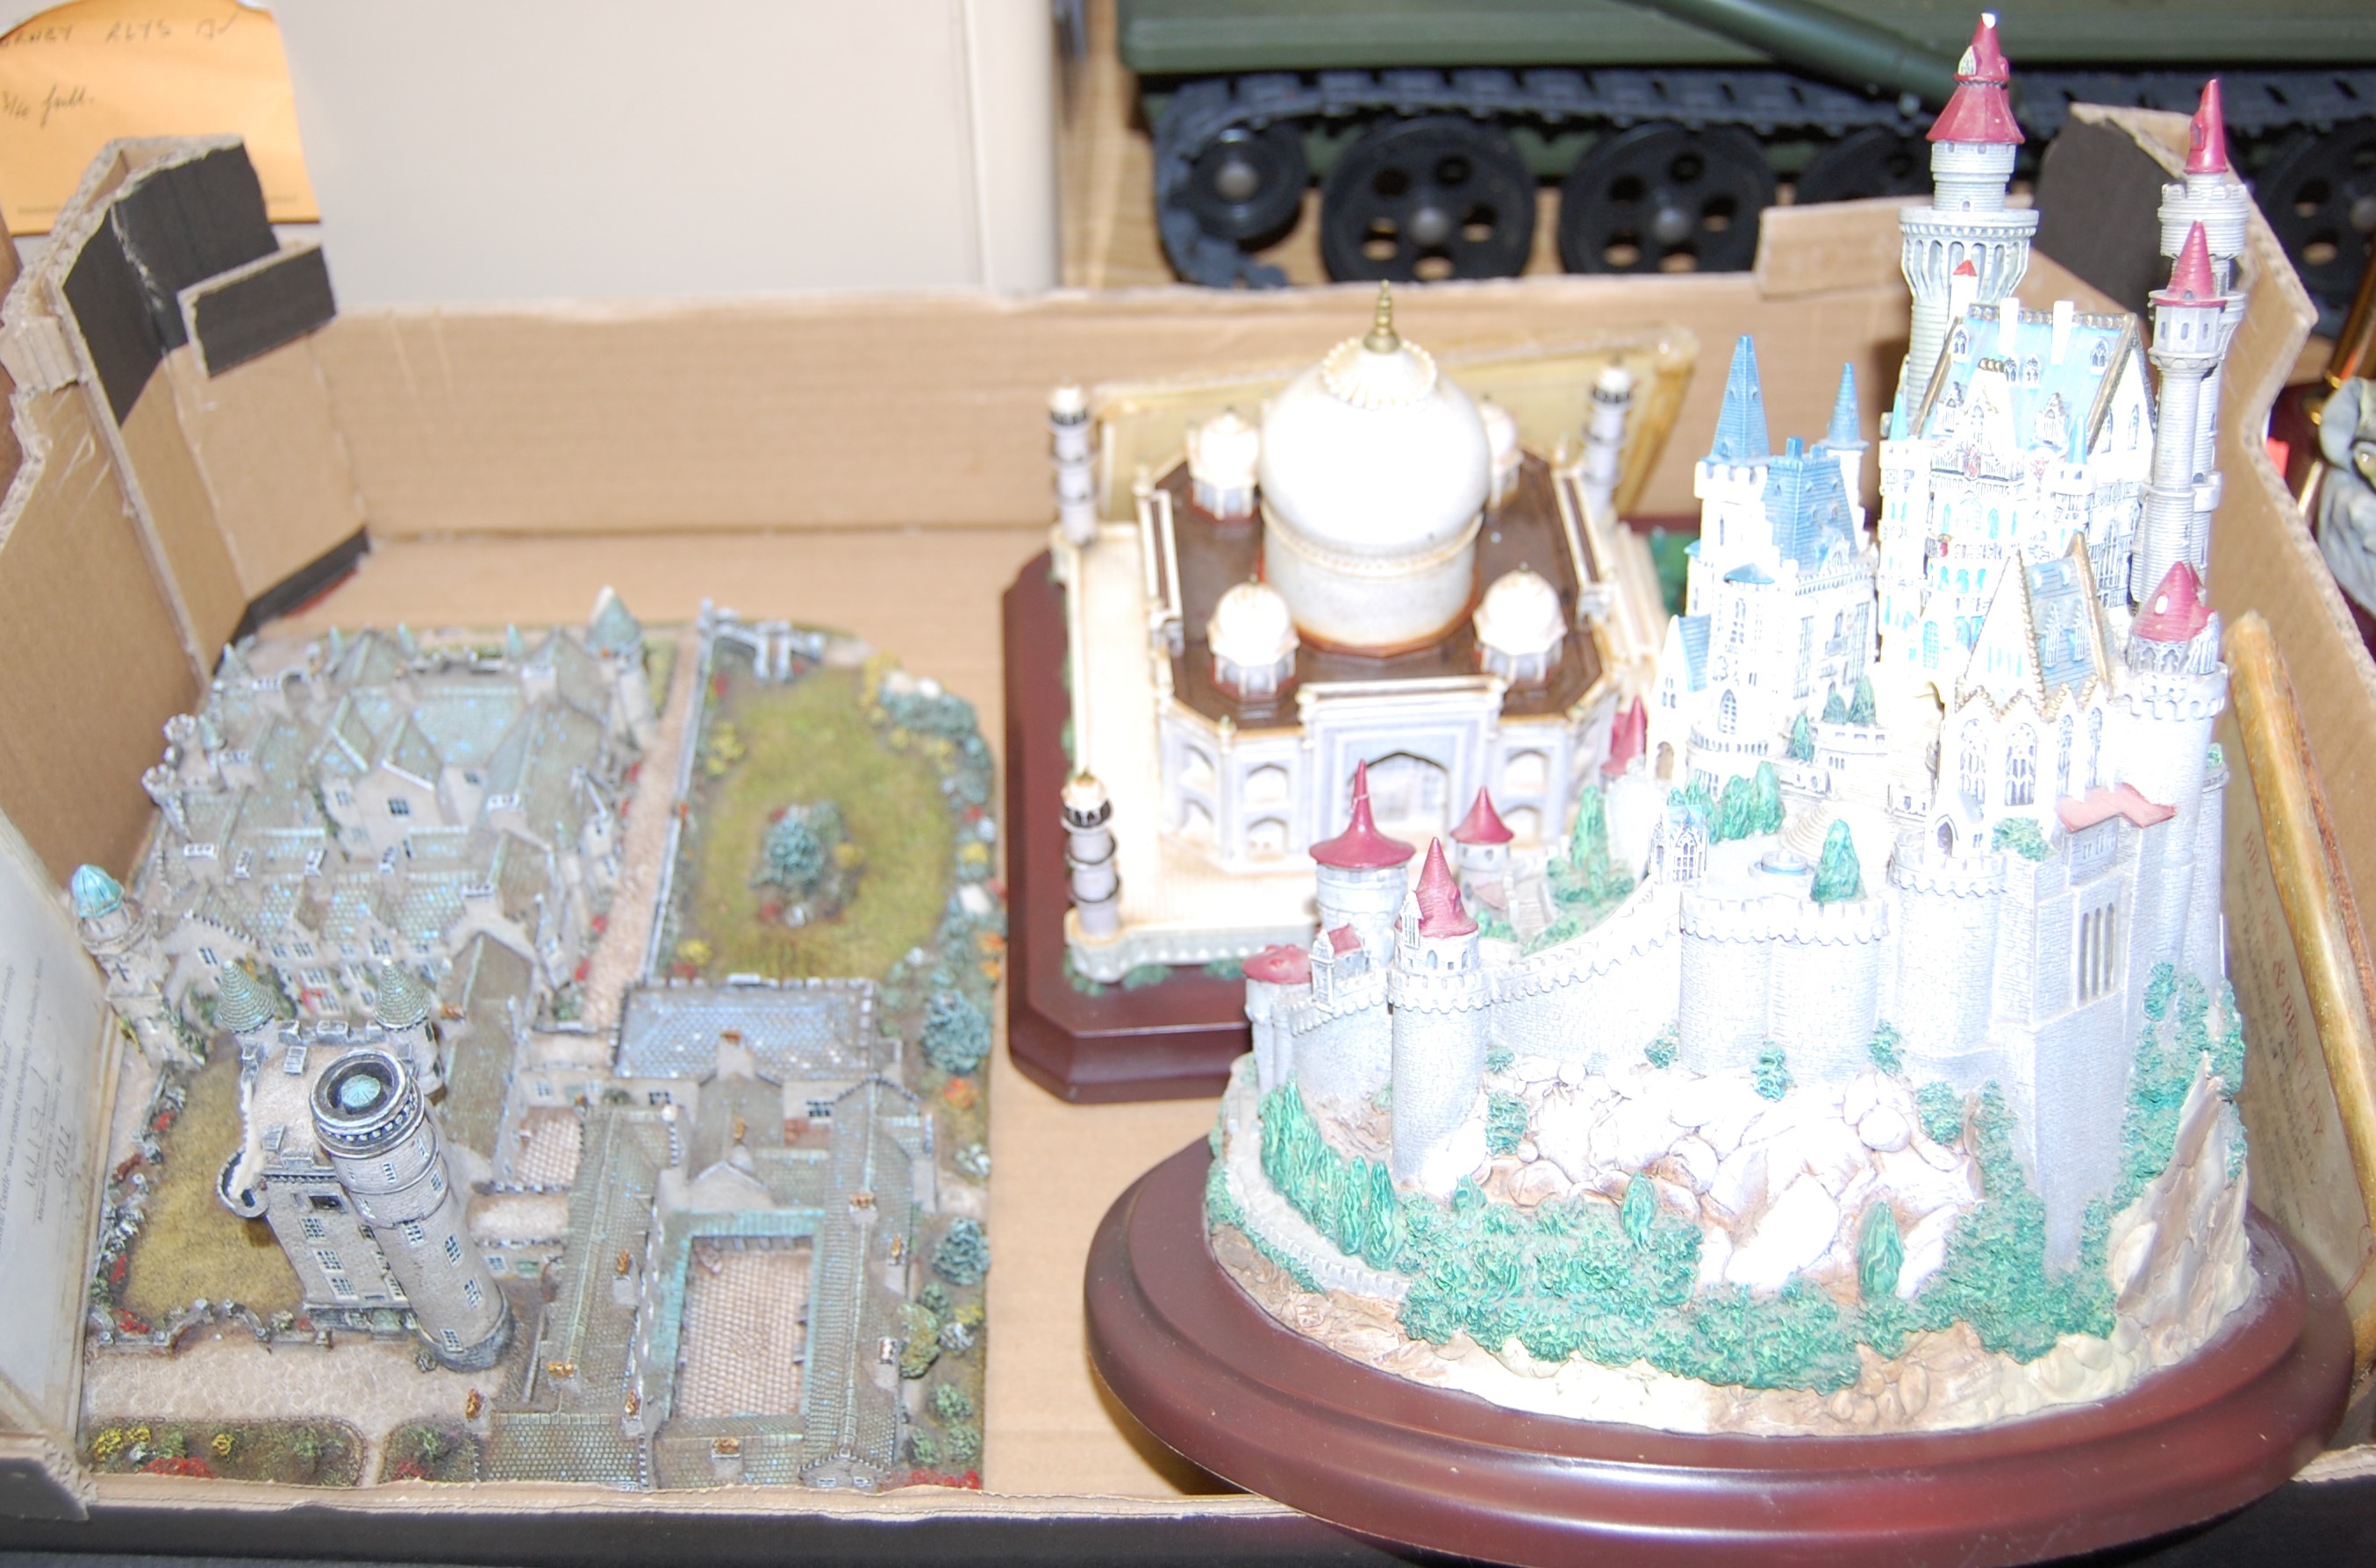 A scale model of Balmoral Castle by Danbury Mint, together with two Brooks & Bentley scale models of